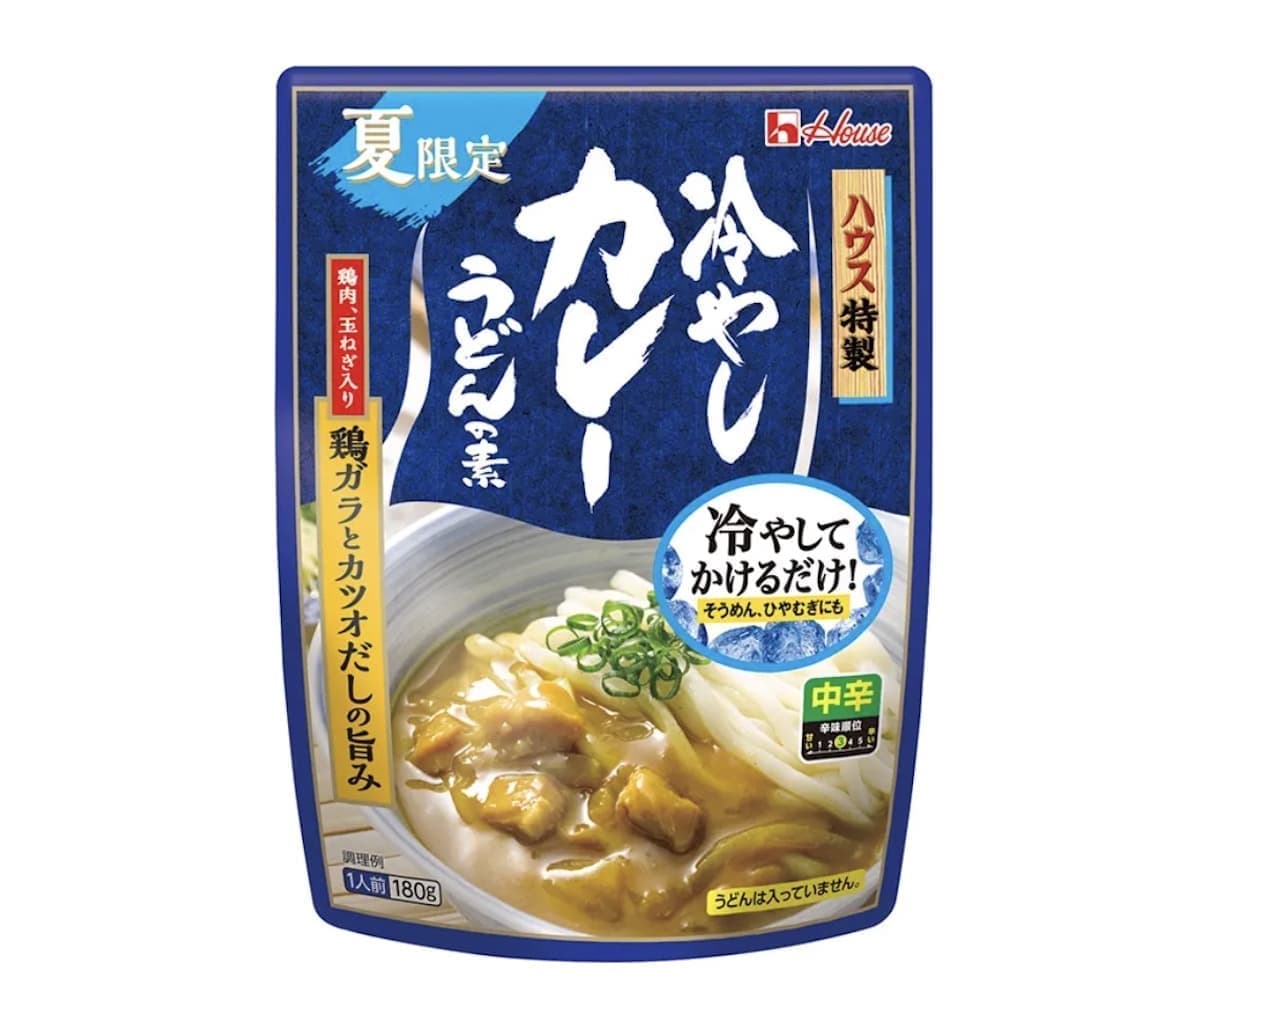 Cold Curry Udon Noodle Soup [Medium Hot]" from House Foods